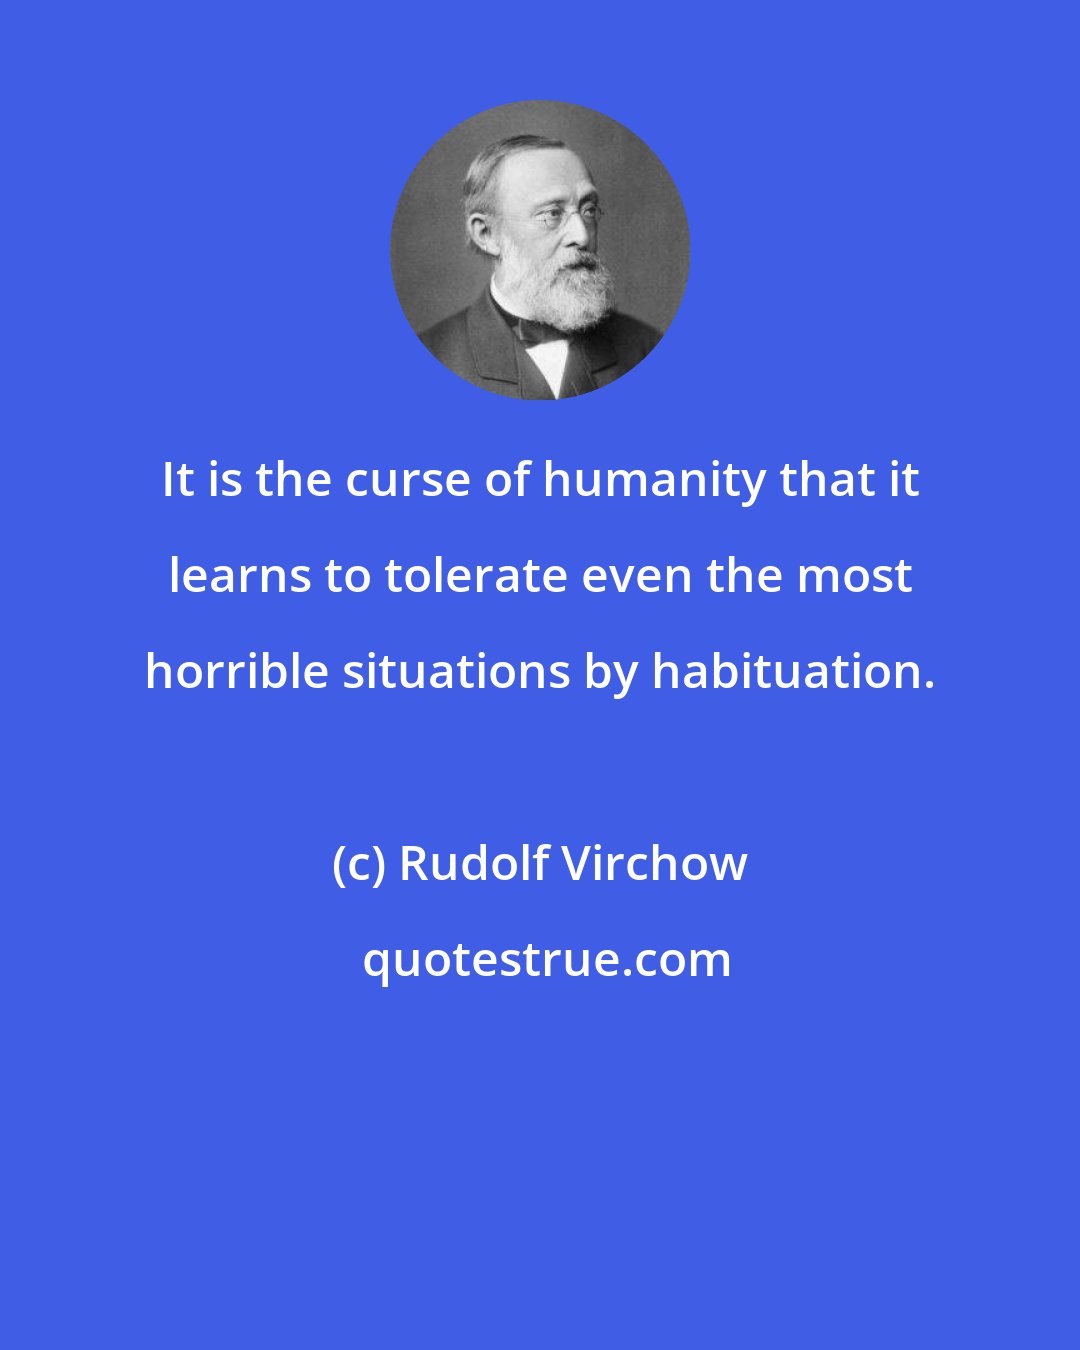 Rudolf Virchow: It is the curse of humanity that it learns to tolerate even the most horrible situations by habituation.